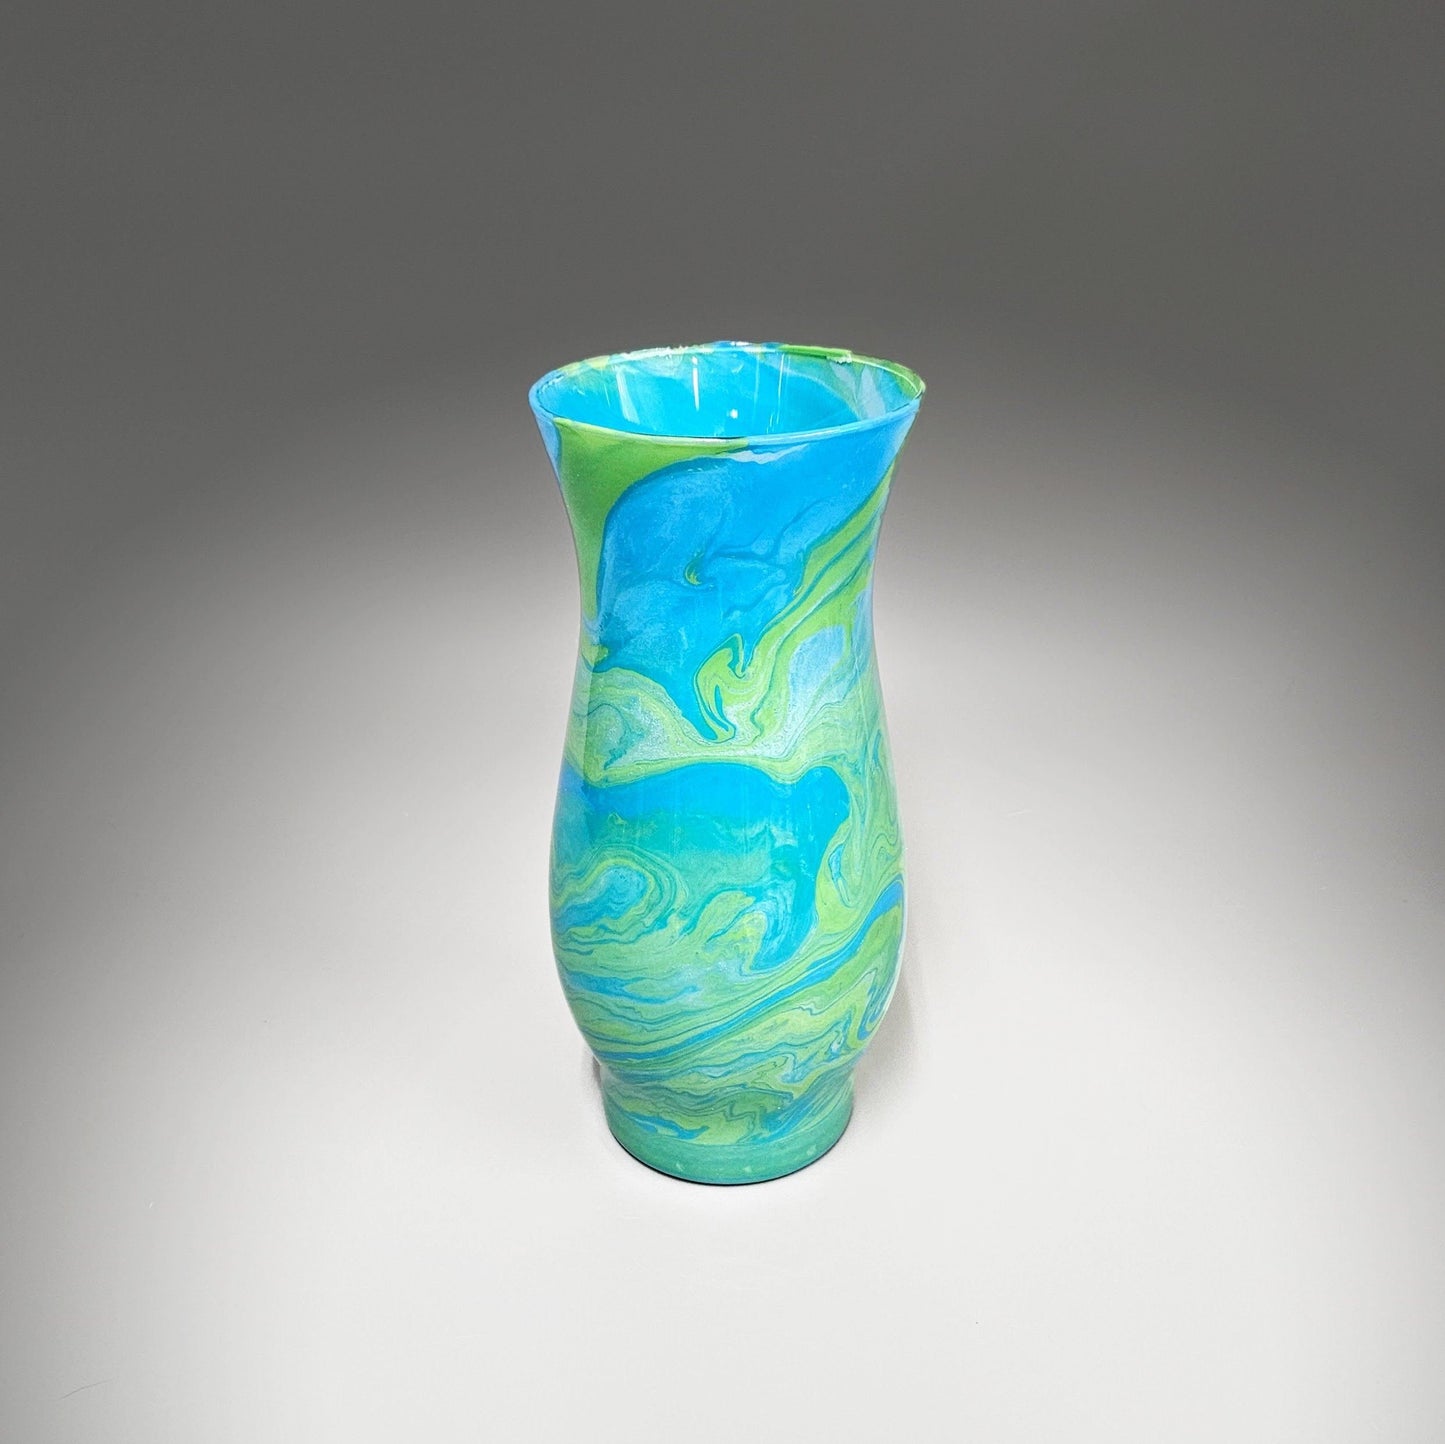 Flower Vase in Sky Blue and Bright Green